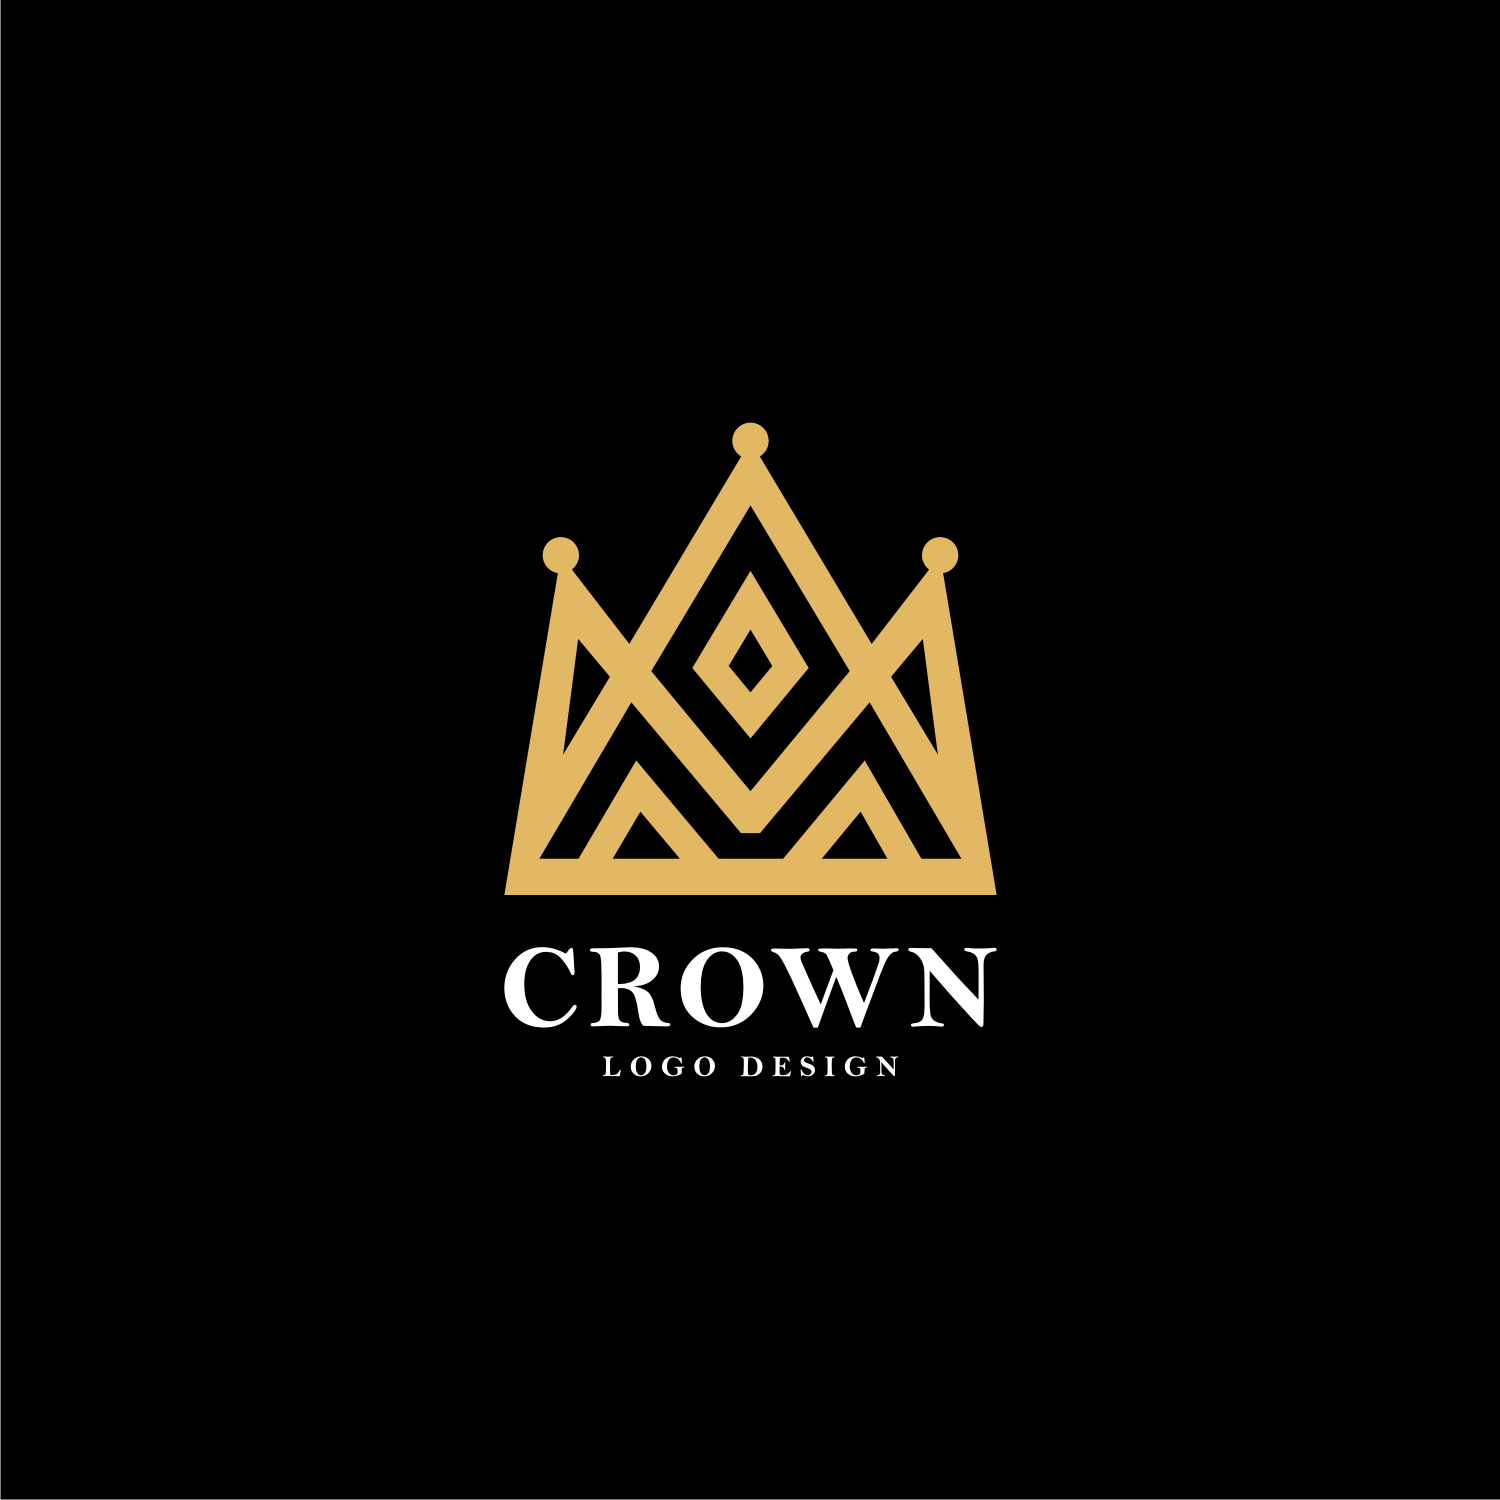 Crown Logo Design Template cover image.